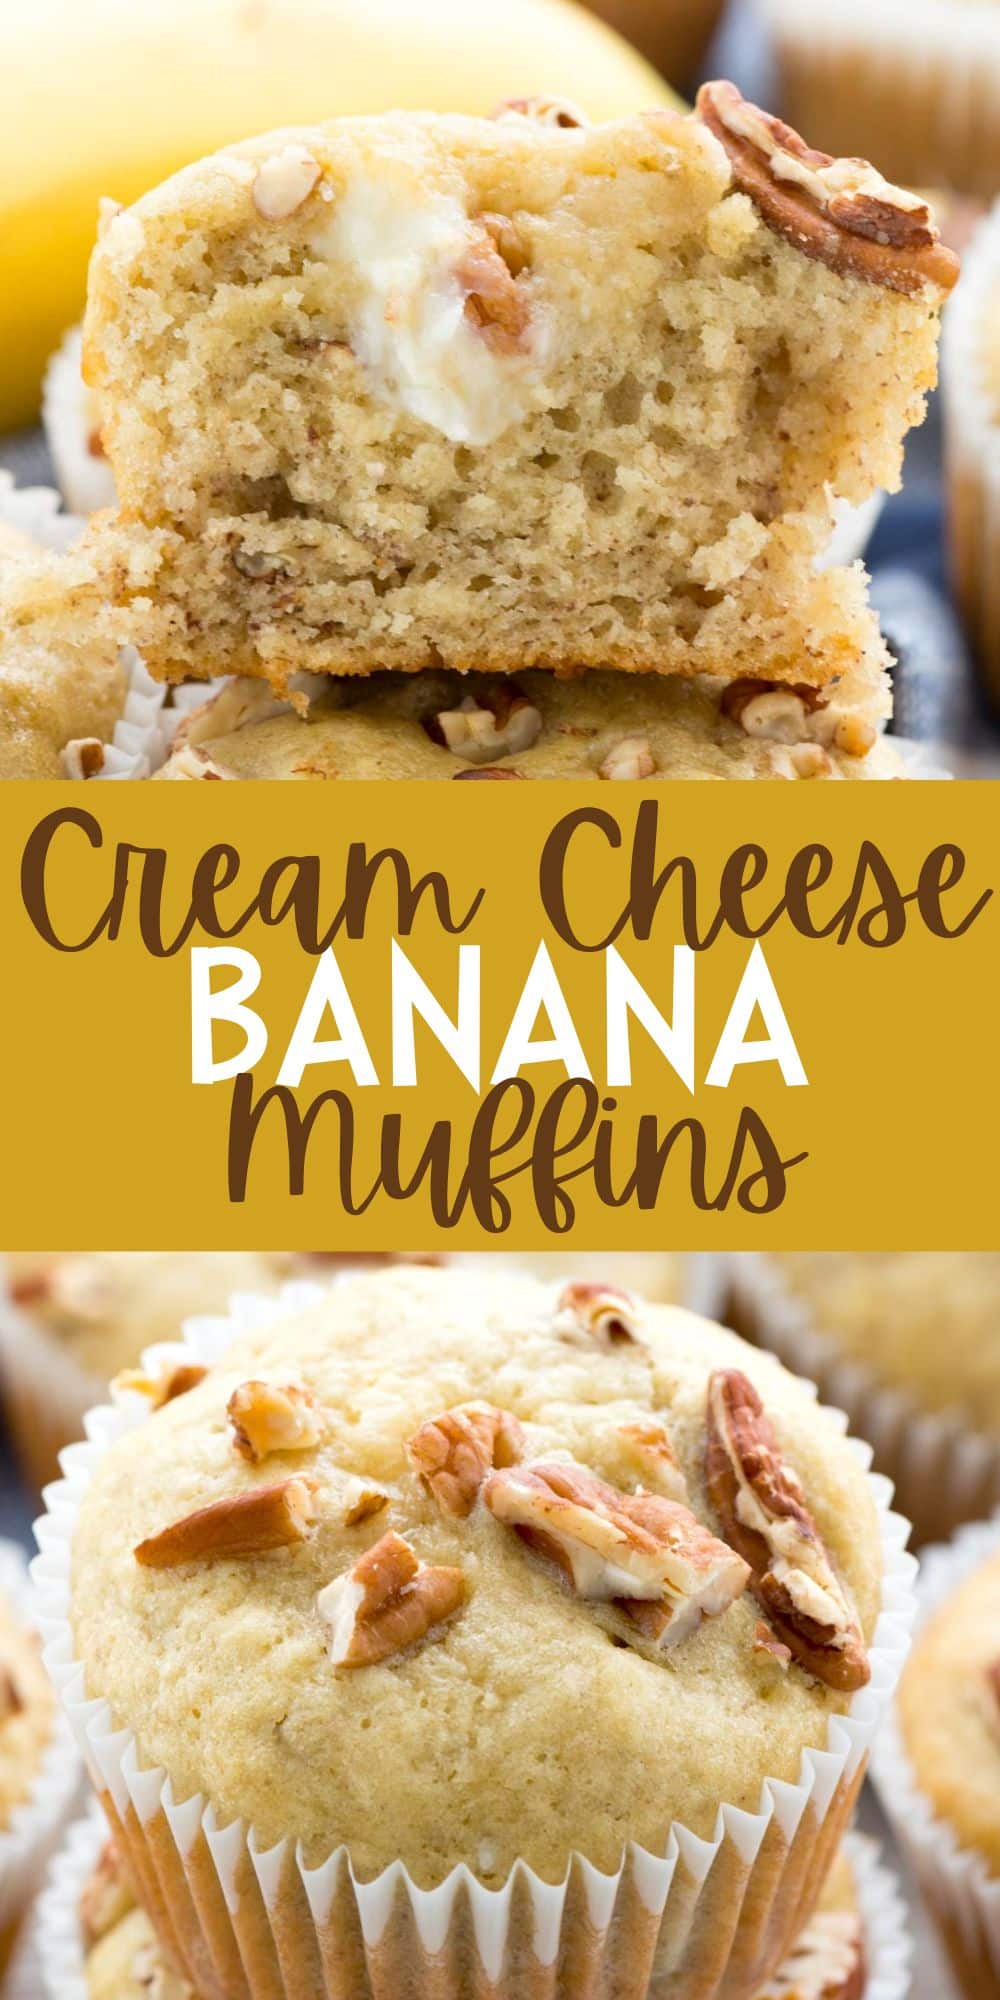 two photos of stacked banana muffins with cream cheese and pecan baked in with words on the image.